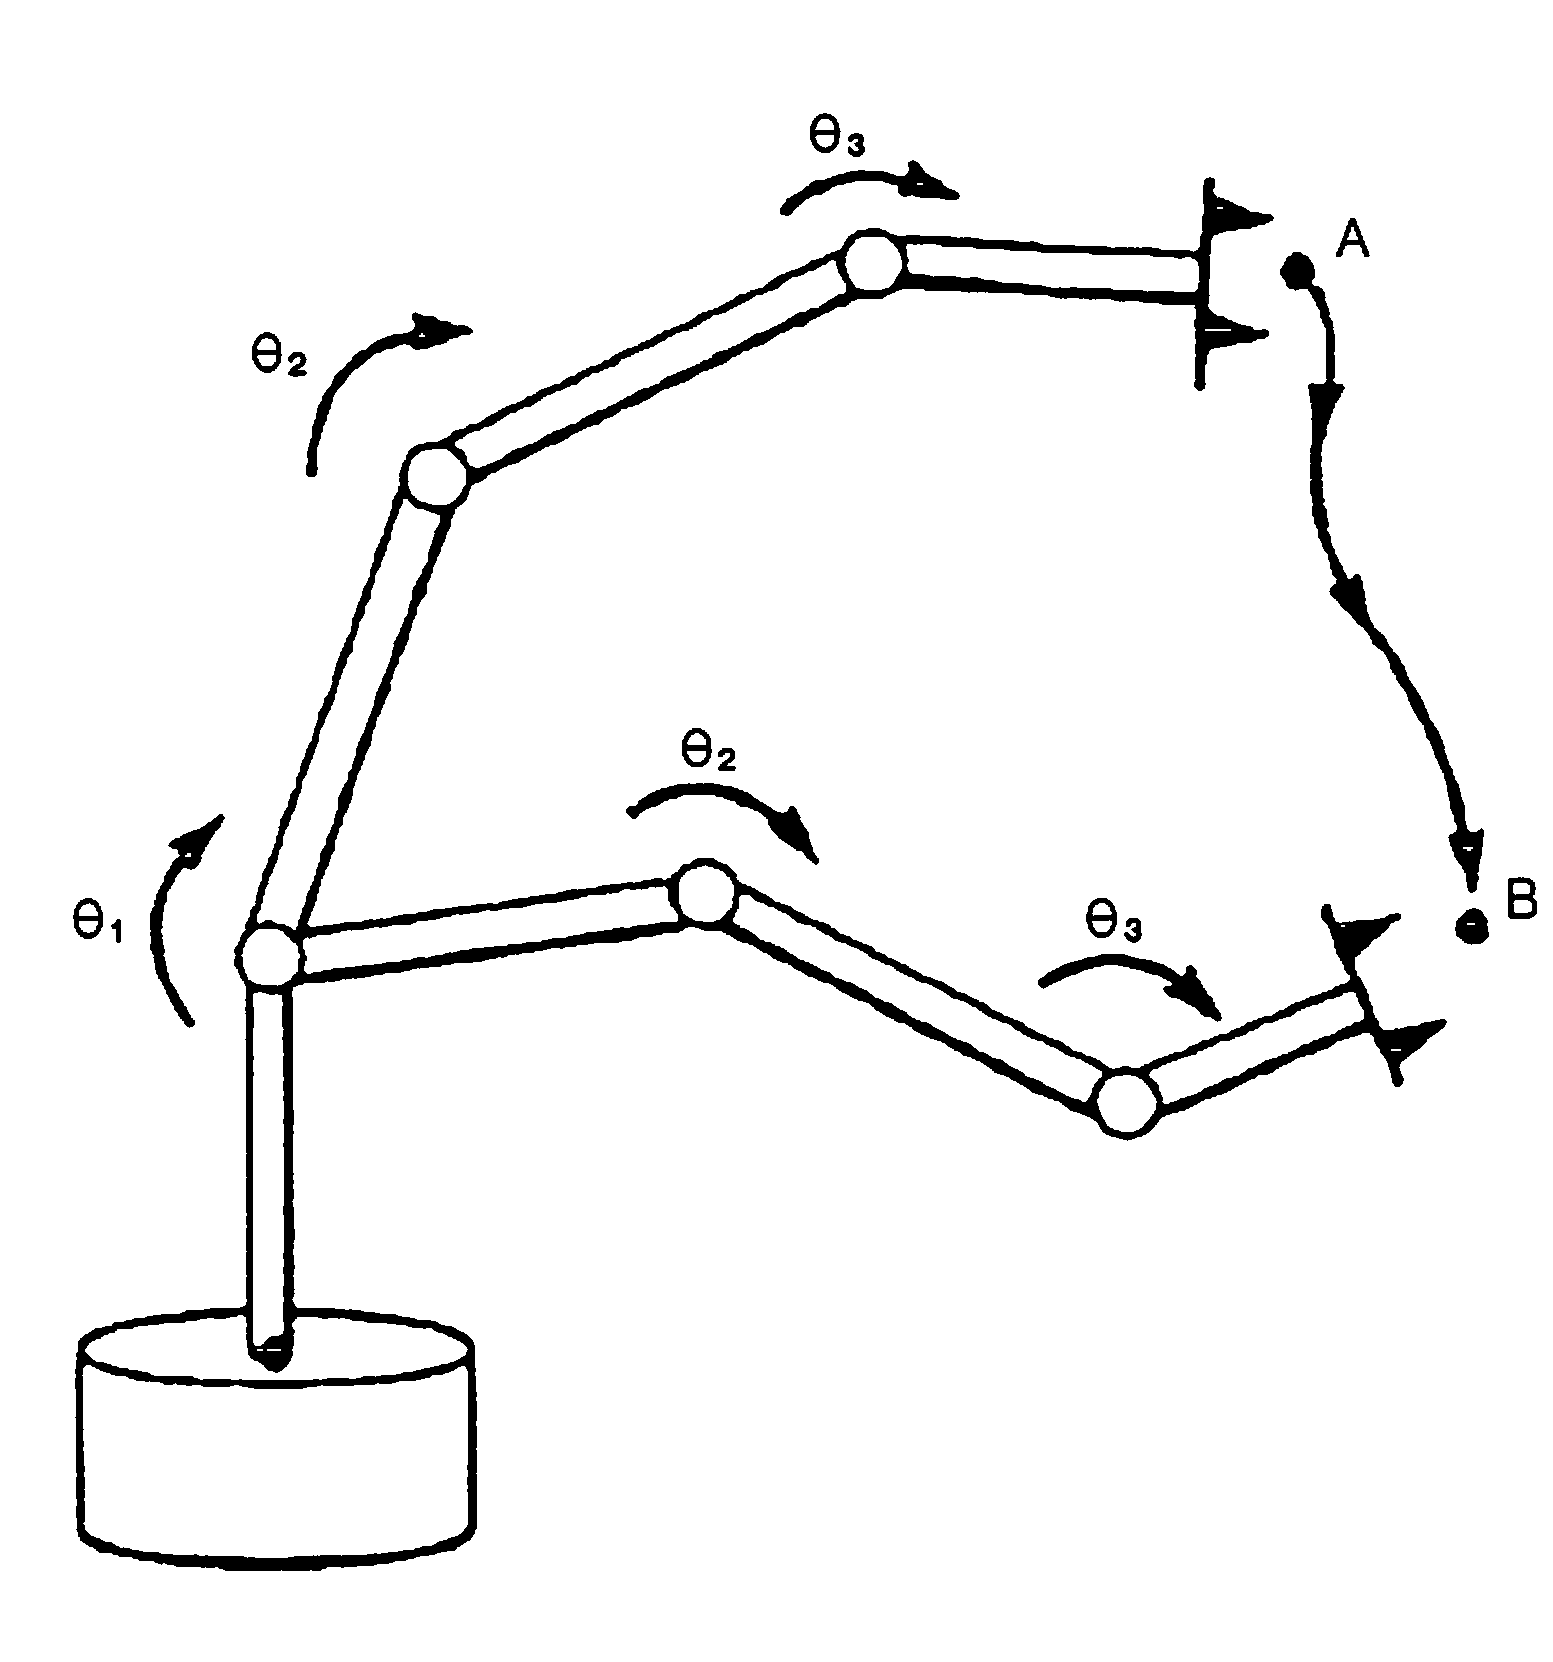 System and method for motion control of humanoid robot